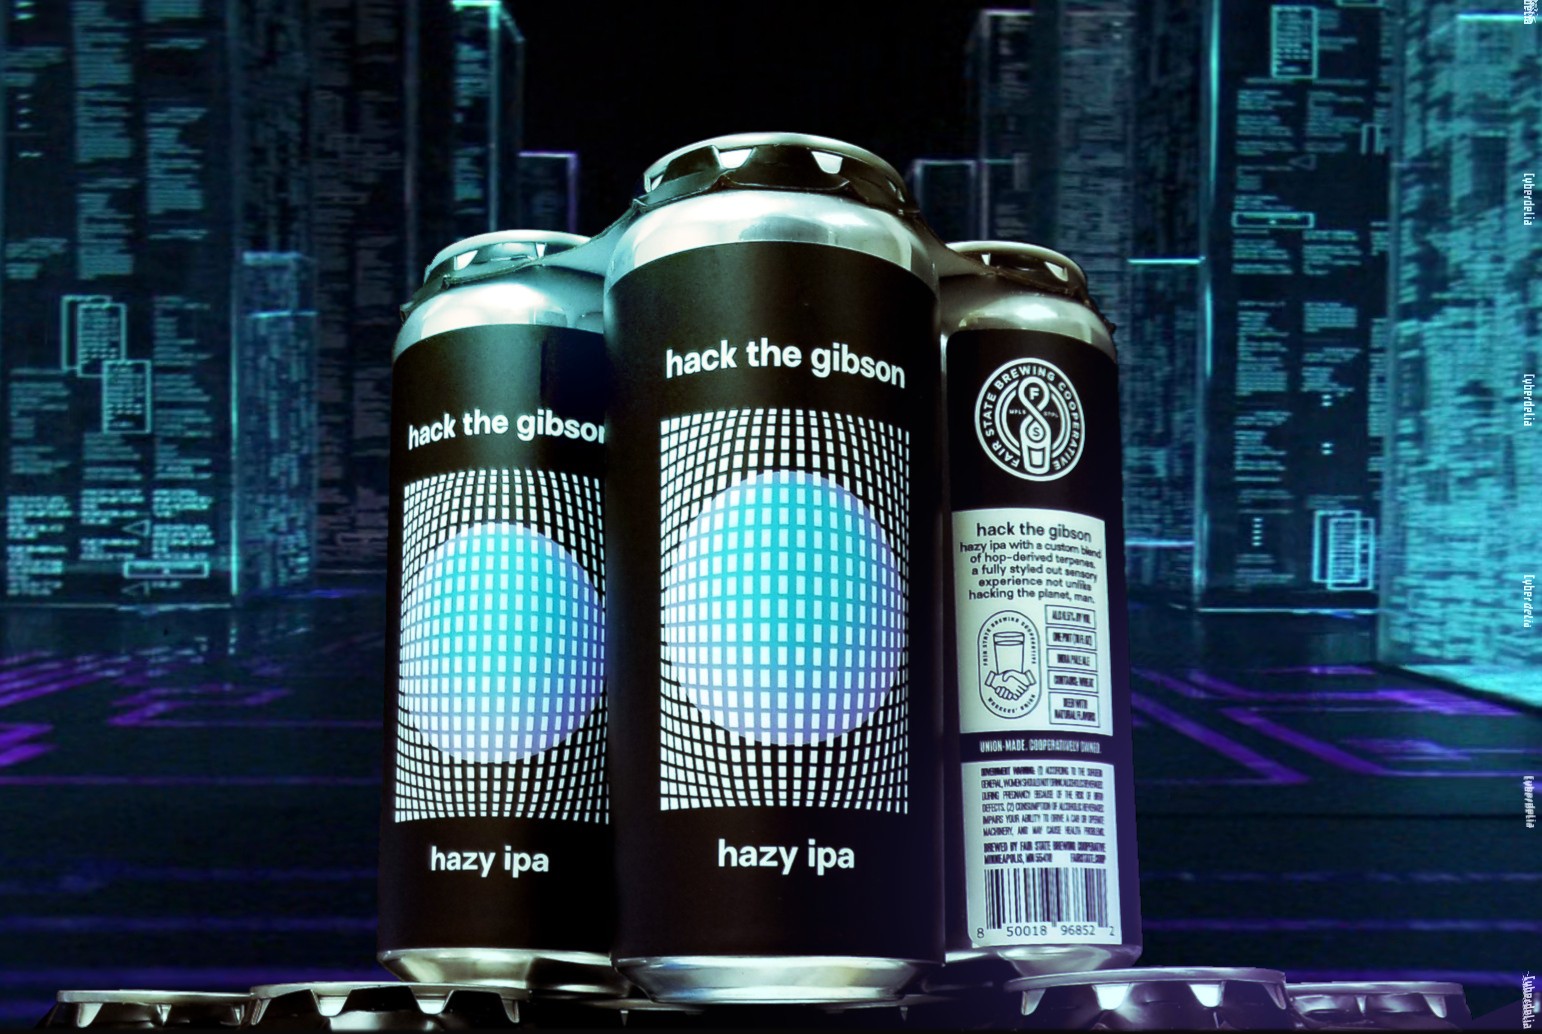 Fair State Brewing Cooperative's Hack The Gibson Hazy IPA craft beer. Three cans standing together showing the black label with teal and purple globe graphics and in the background the 3d glass towers server filesystem representation of the Gibson supercomputer seen in Hackers (1995).